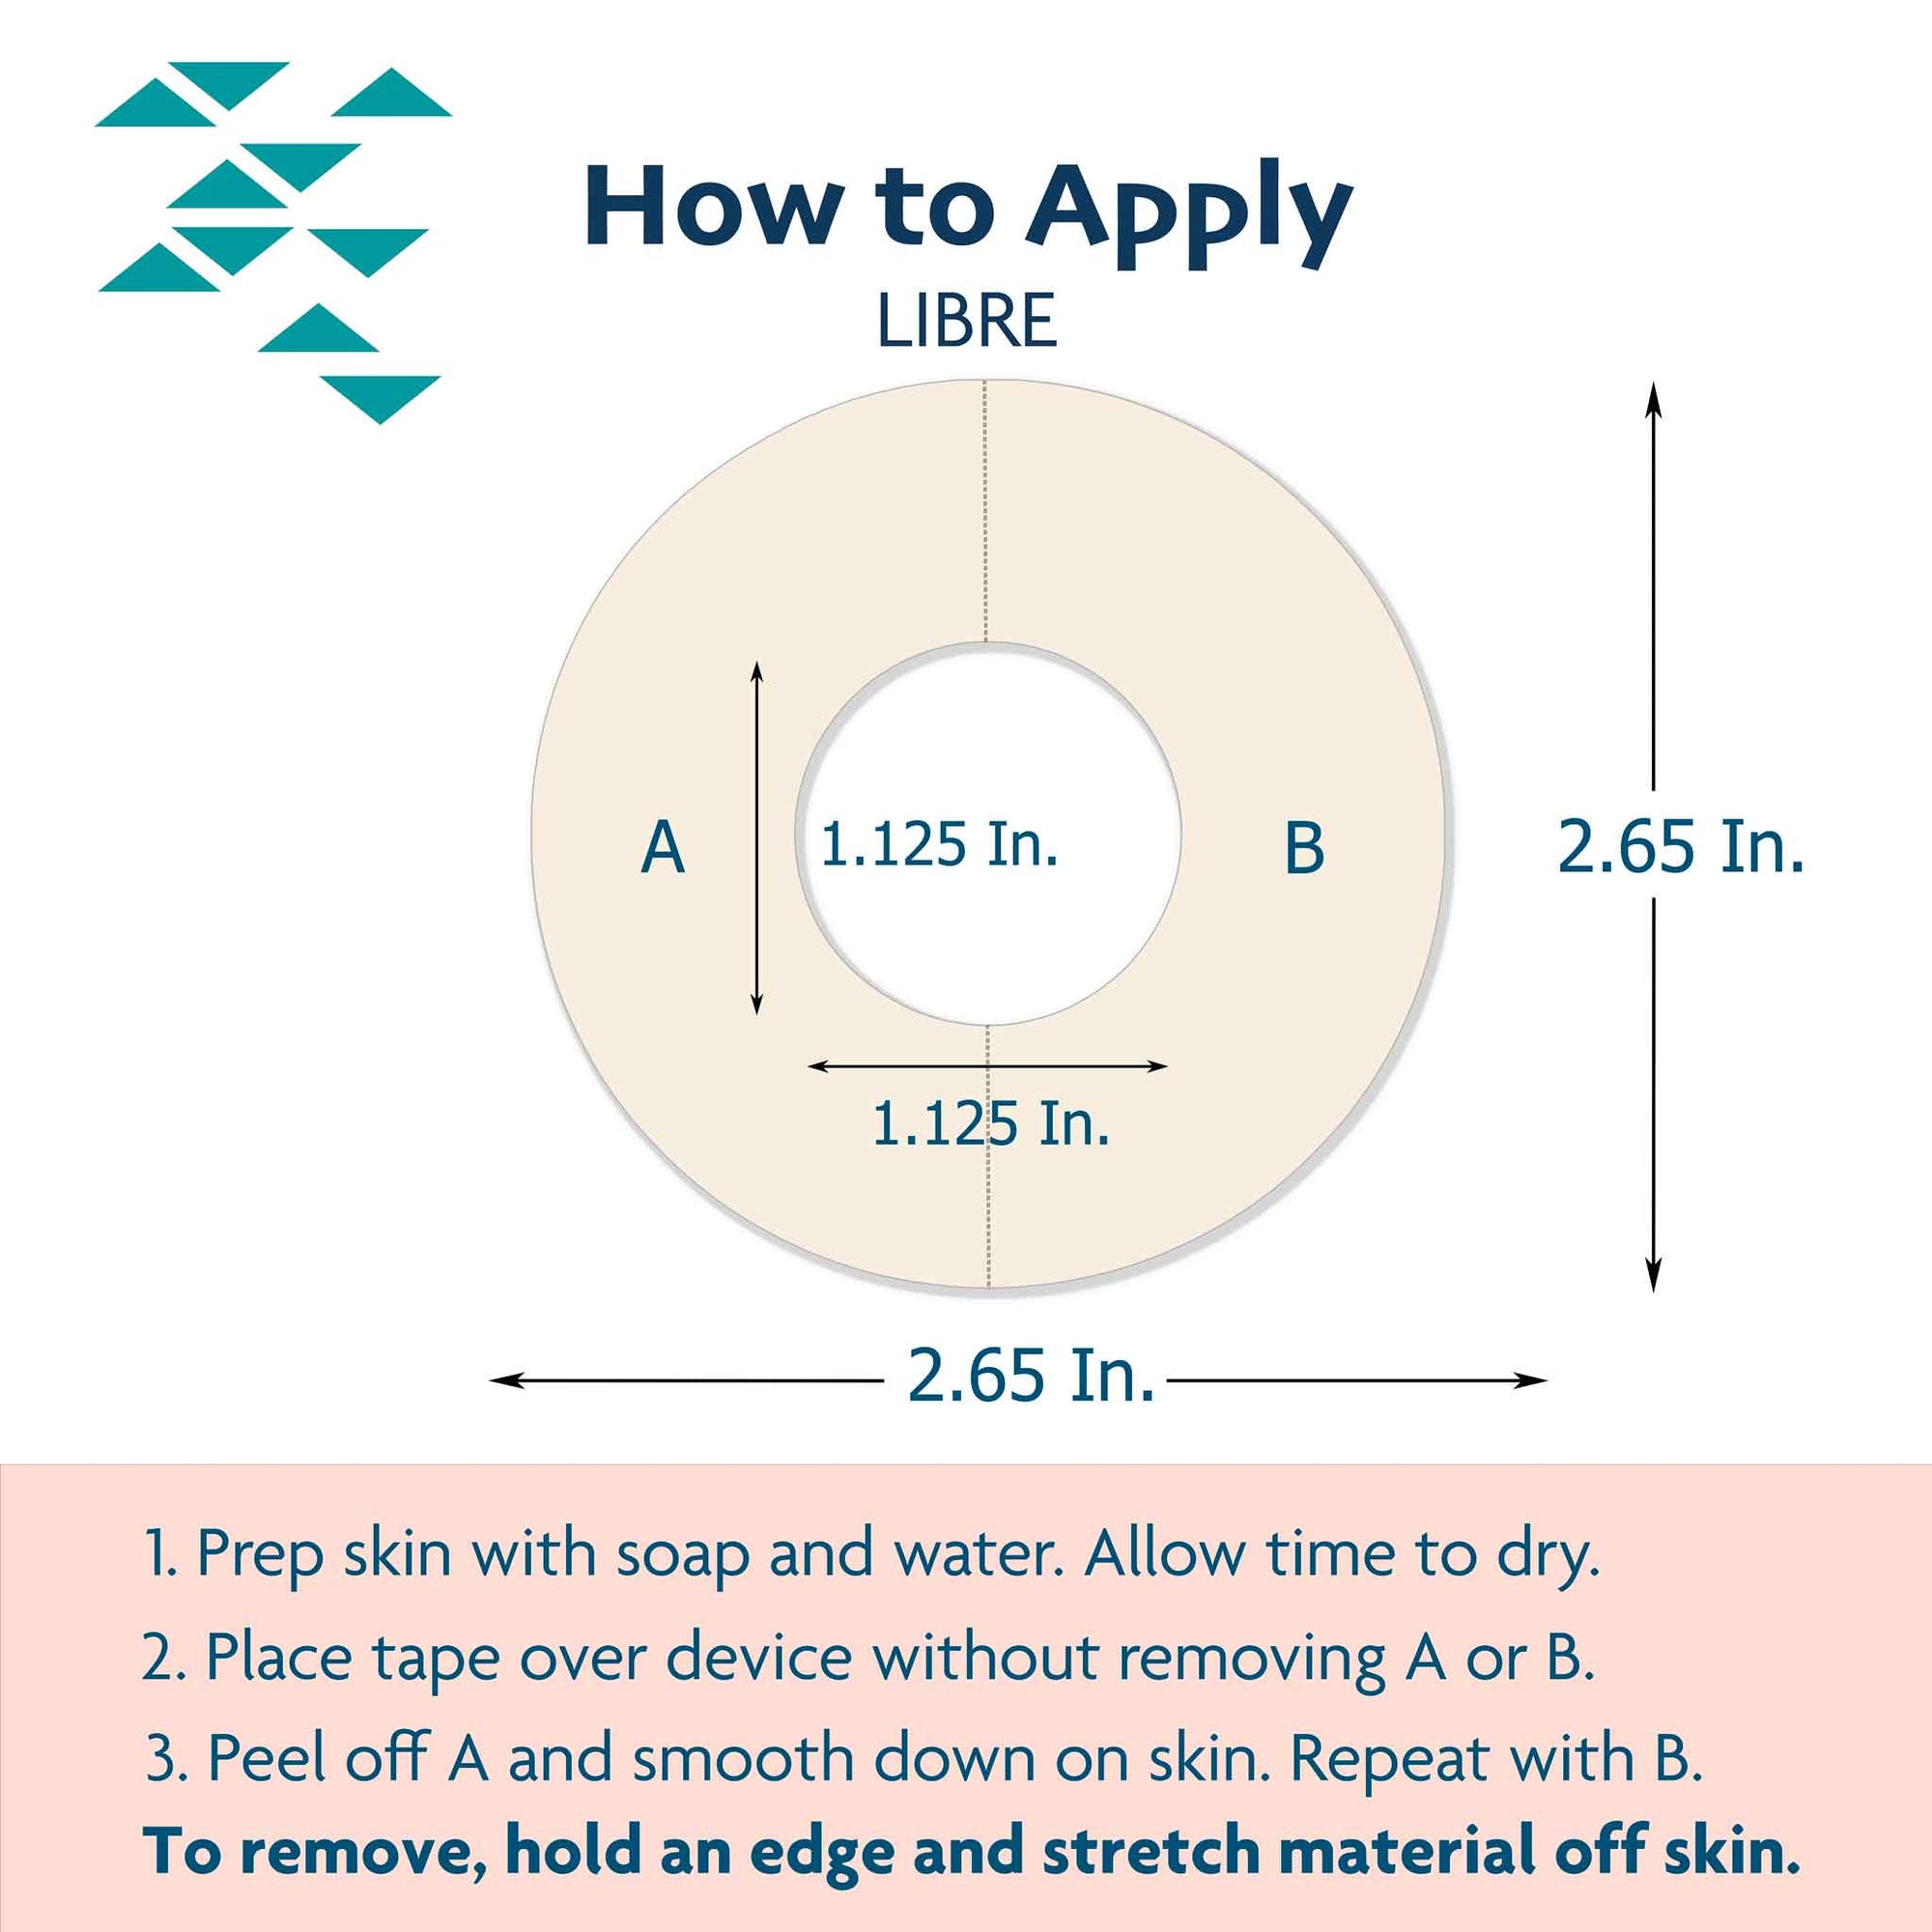 ExpressionMed Tips for securing Libre system with CGM adhesives